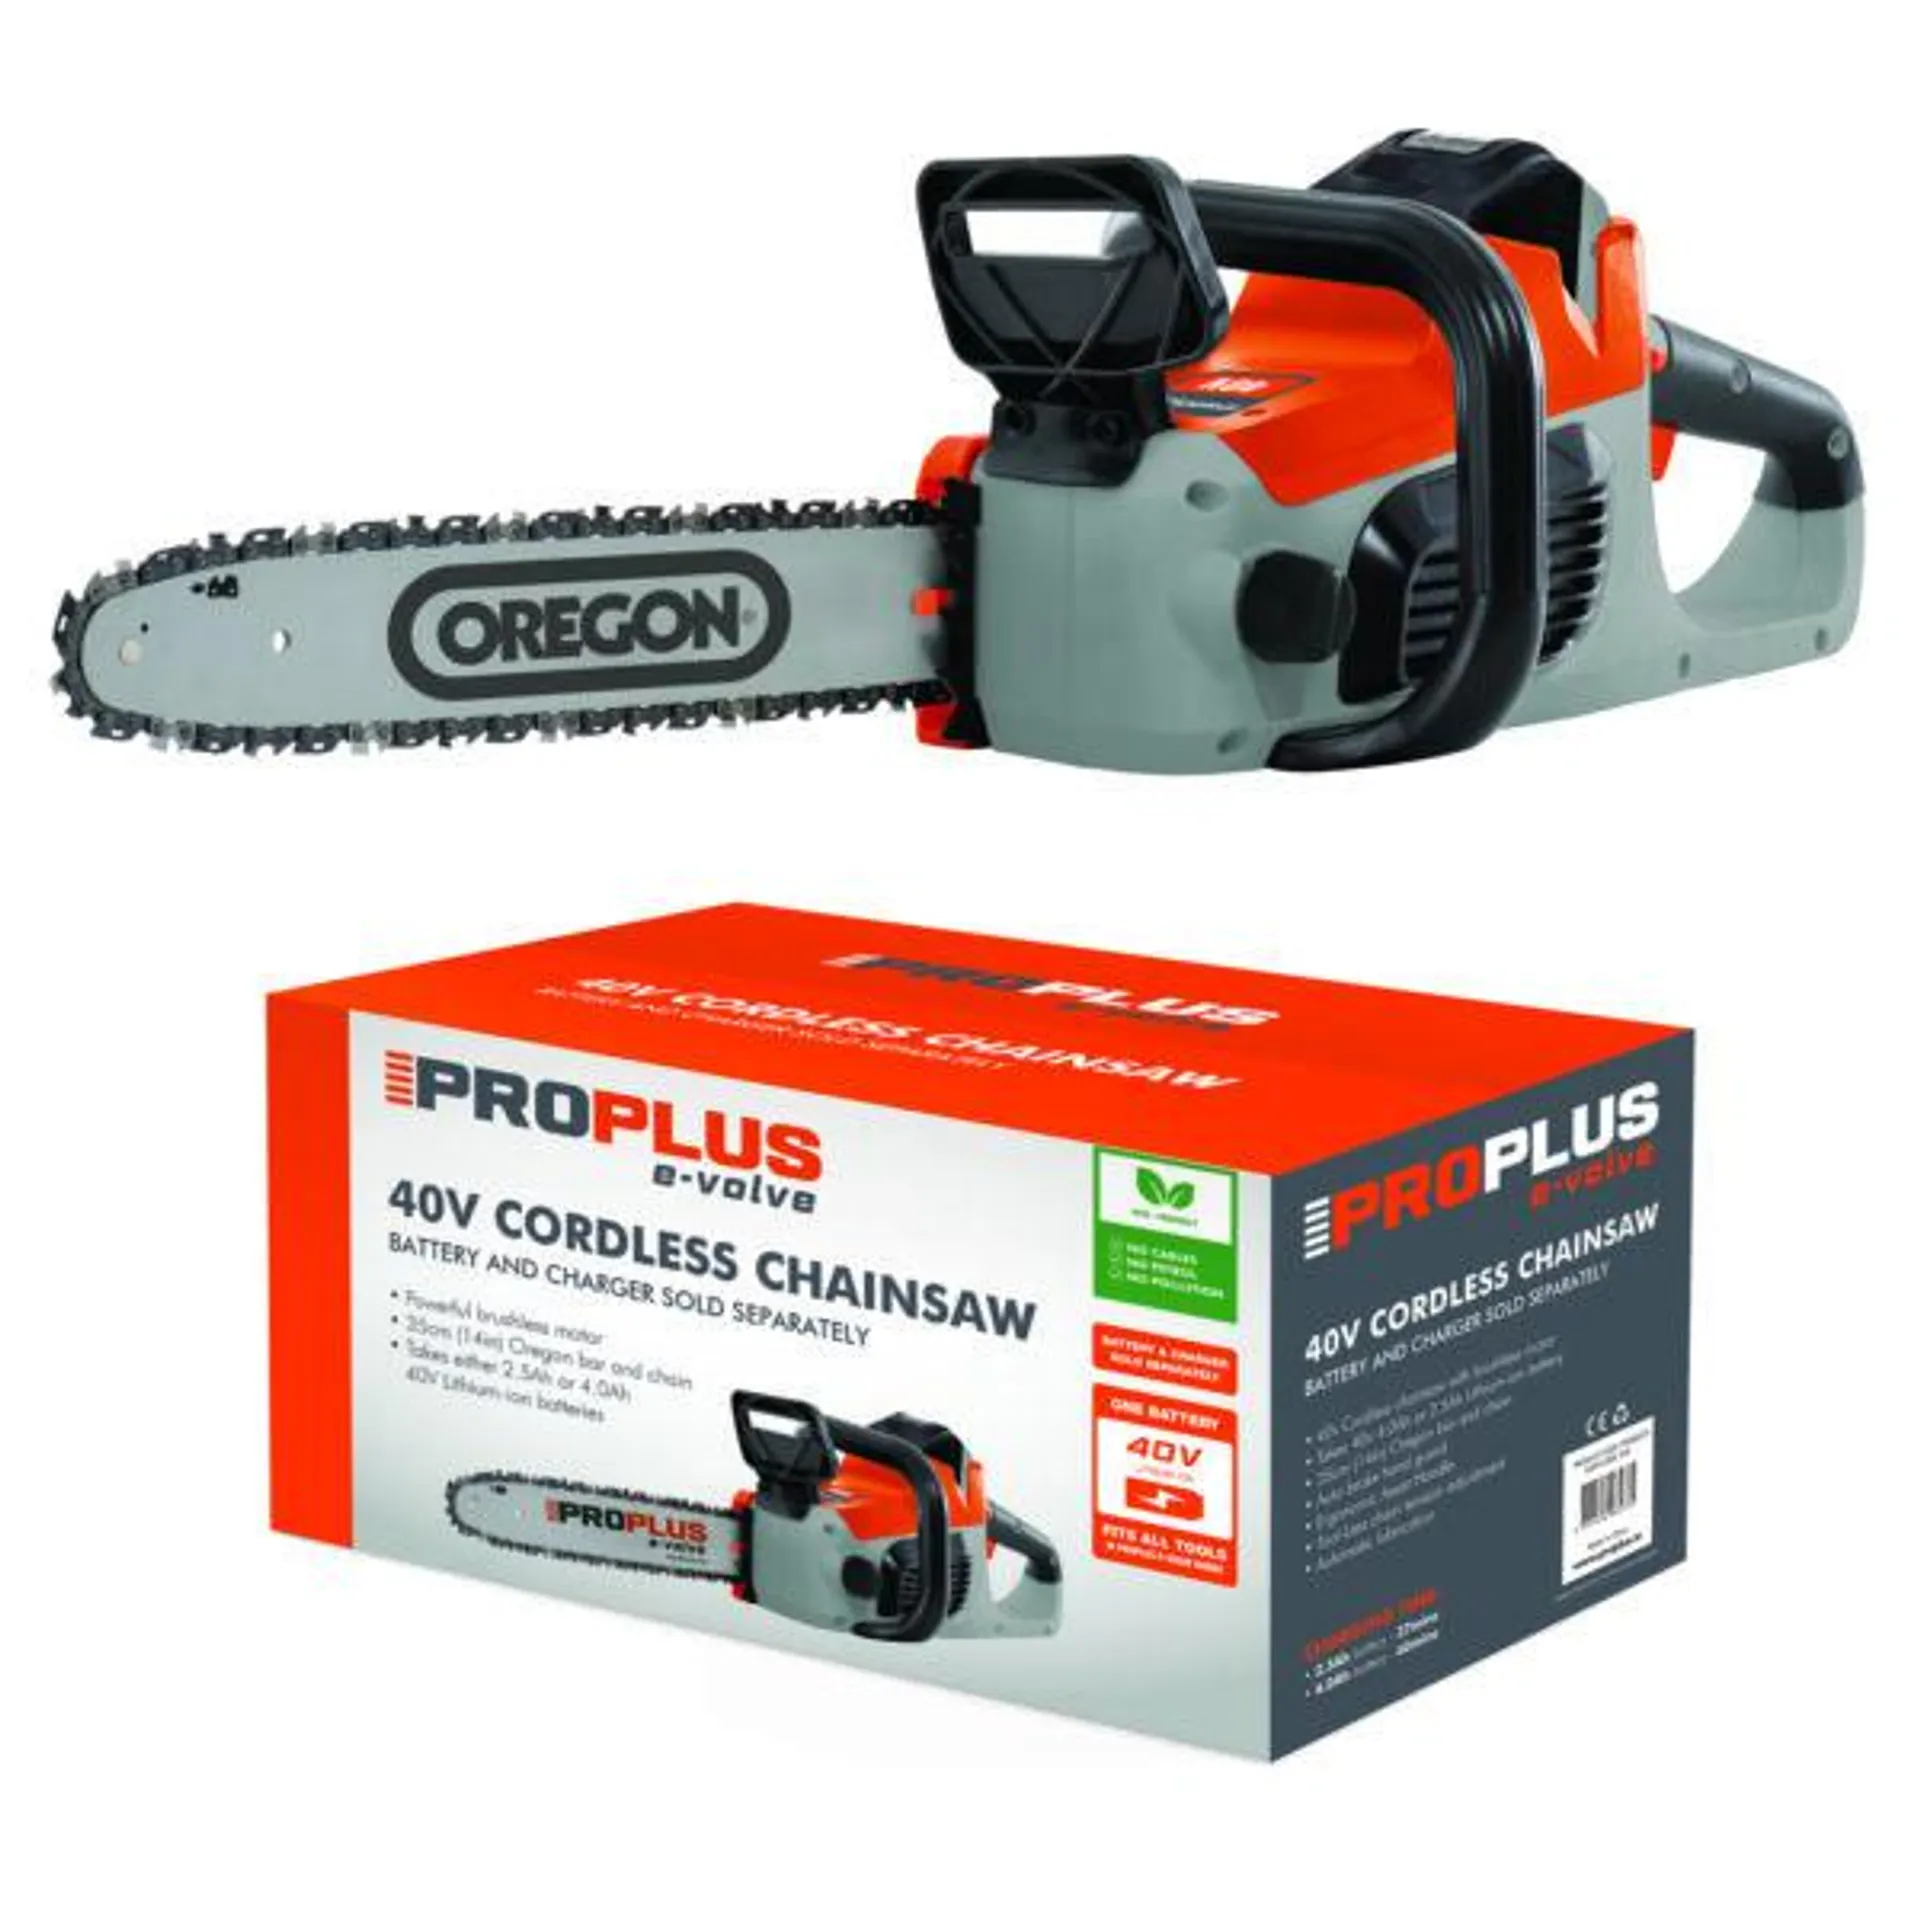 Proplus EVOLVE 40v Cordless Chainsaw Tool ONLY